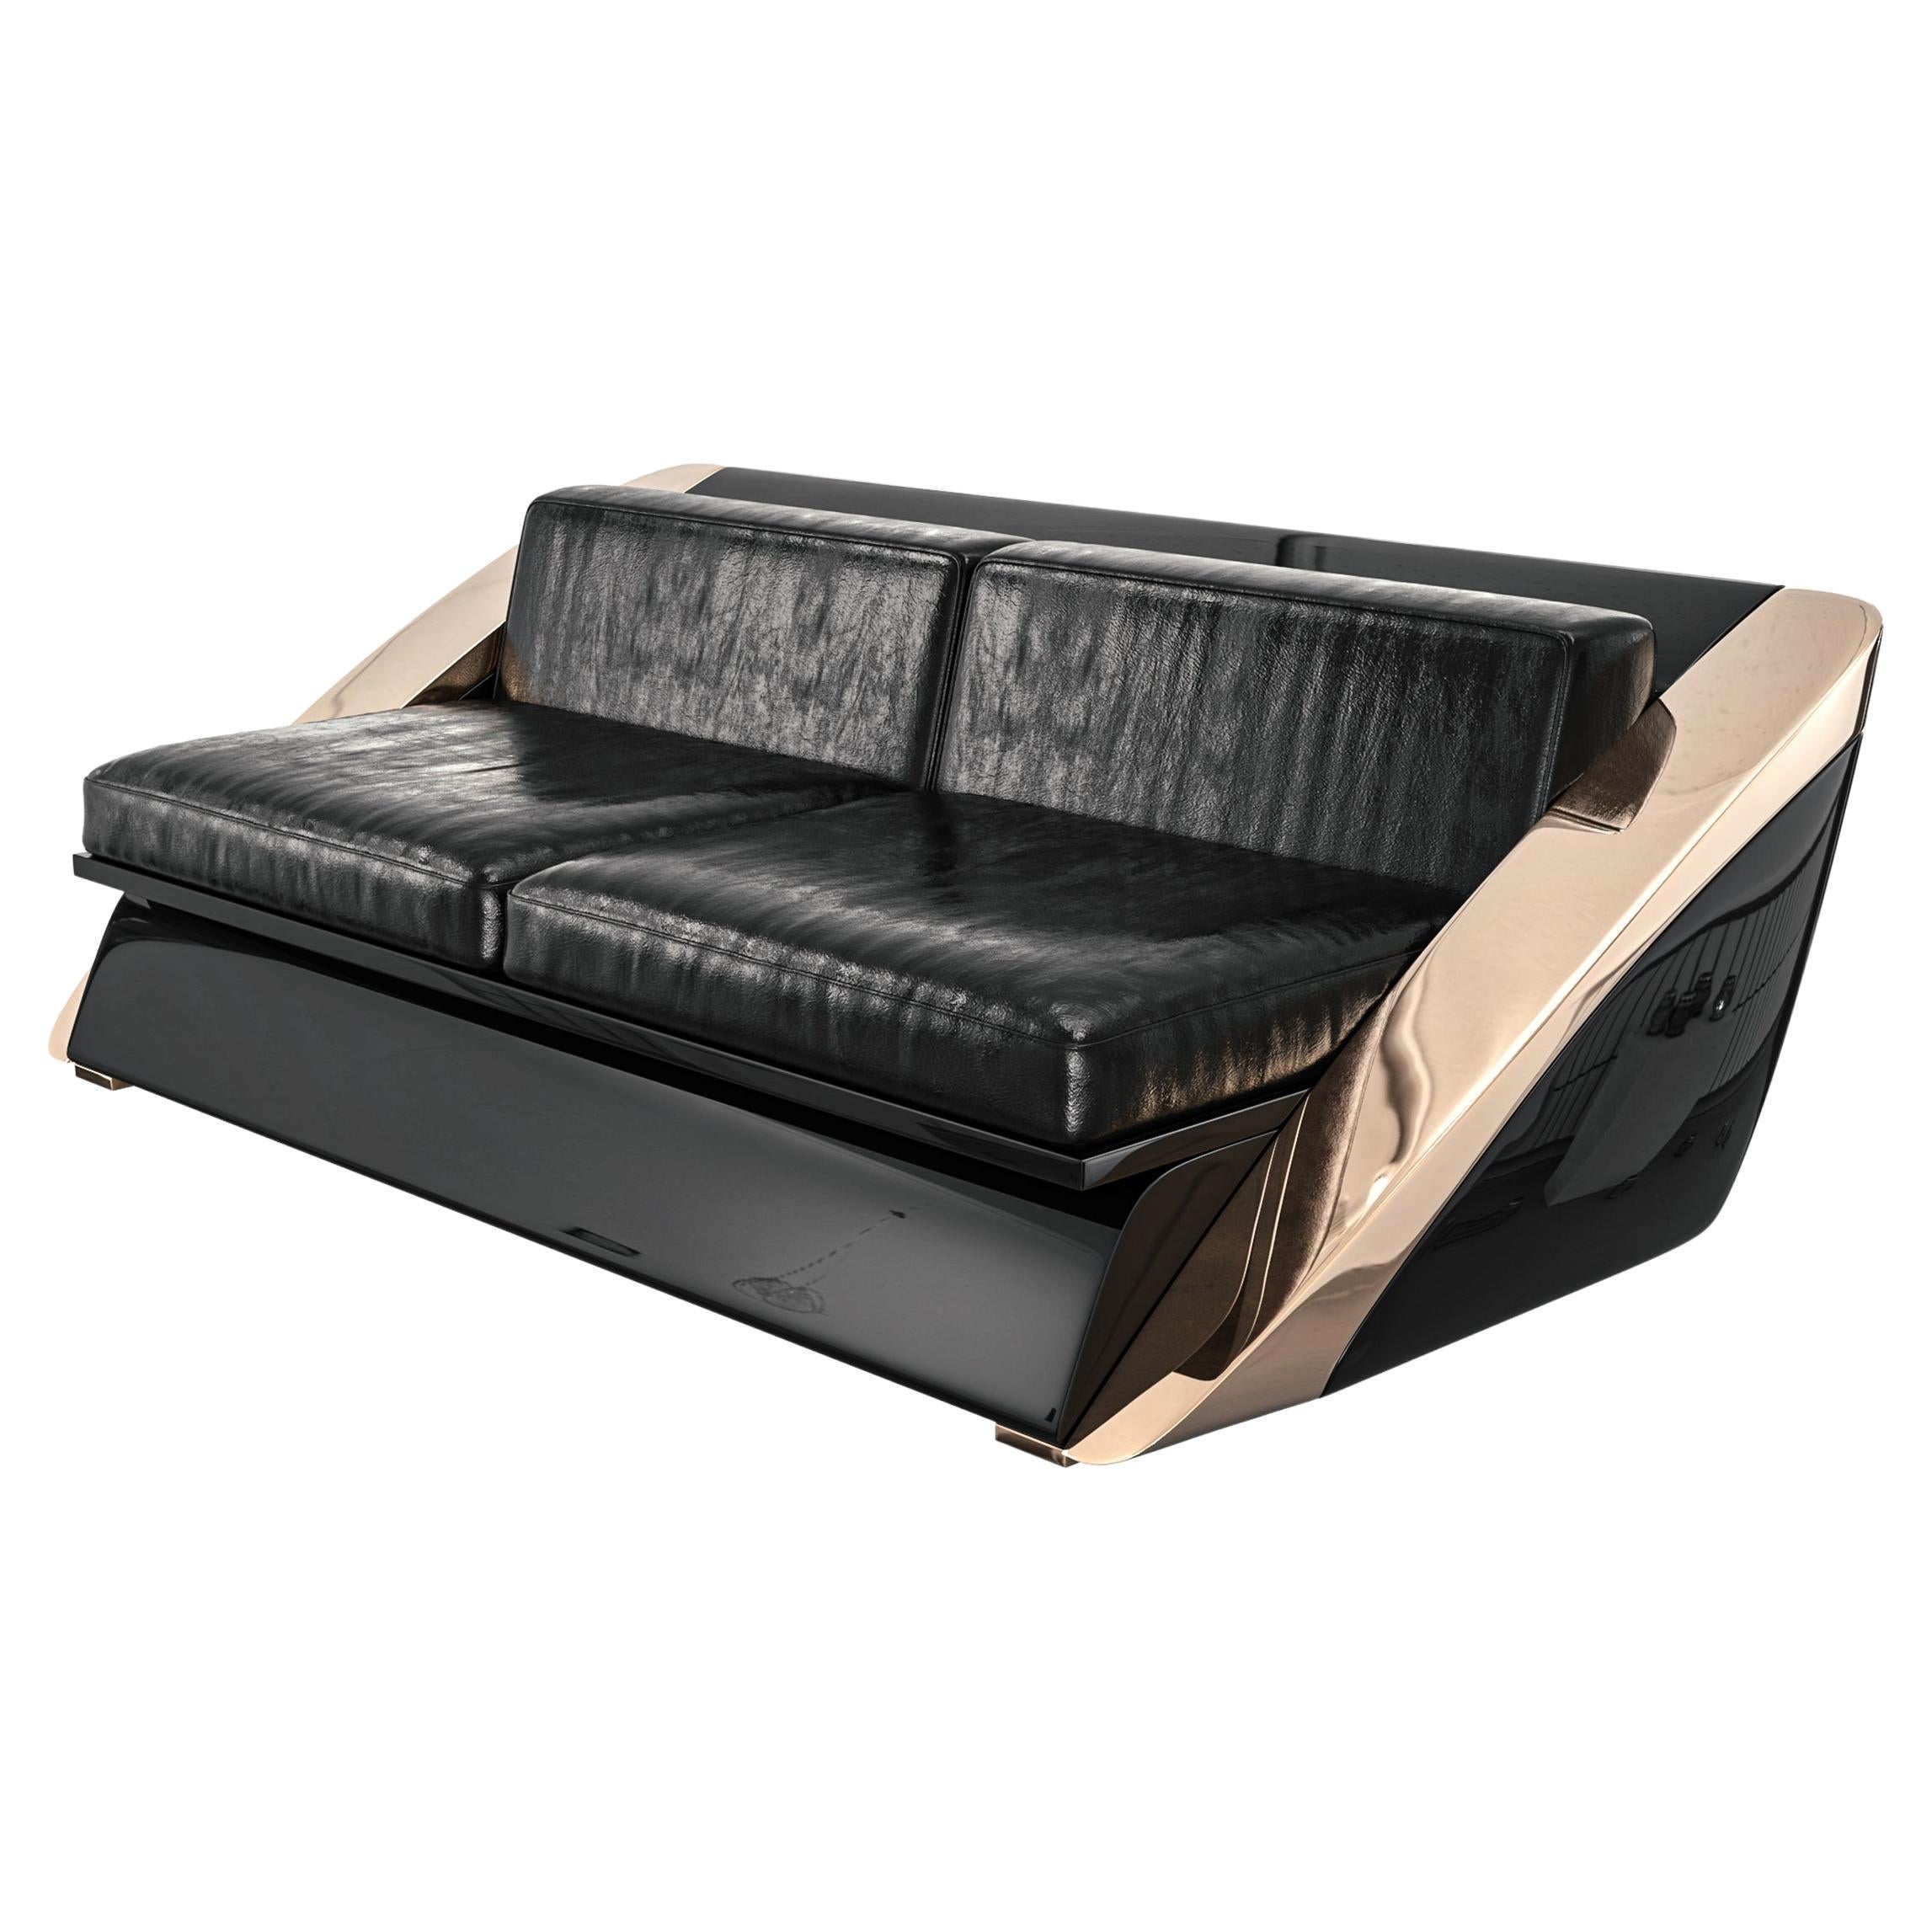 "Galata" Sofa with Bronze, Stainless Steel, Burl Walnut. Hand Crafted, Istanbul For Sale